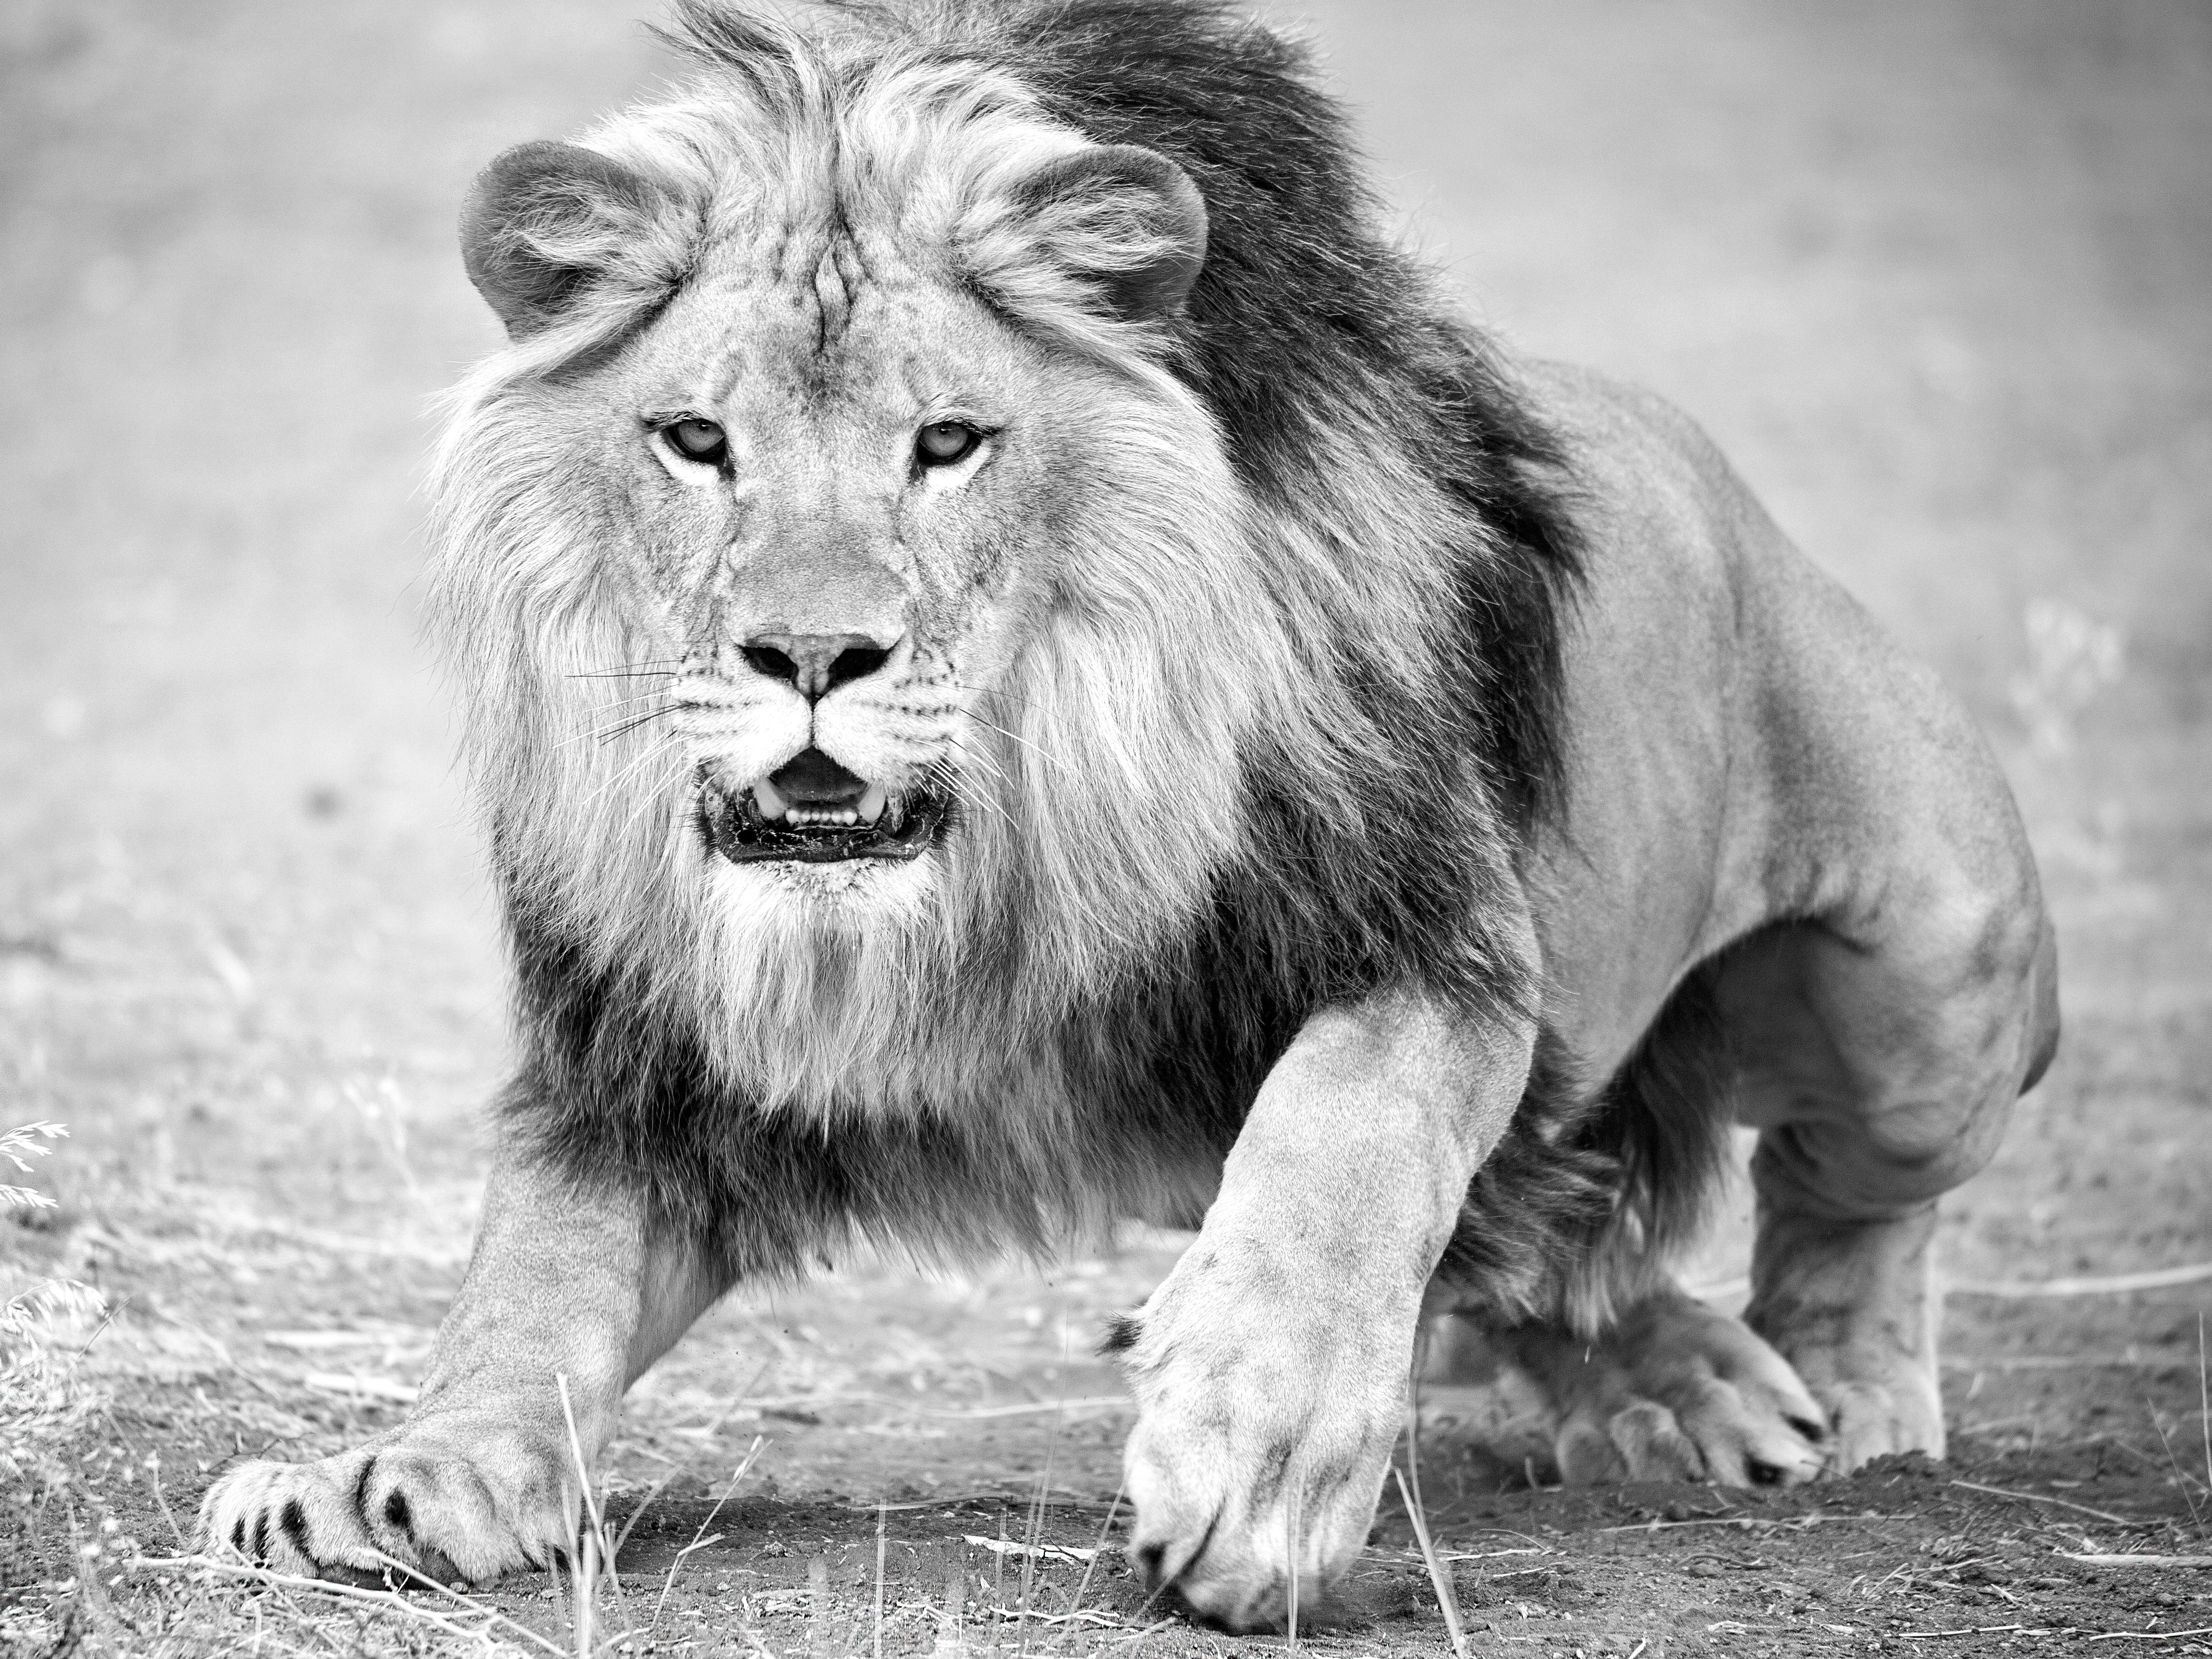 Shane Russeck Animal Print - "The Charge" 50x60 - Black & White Photography, Lion Photograph